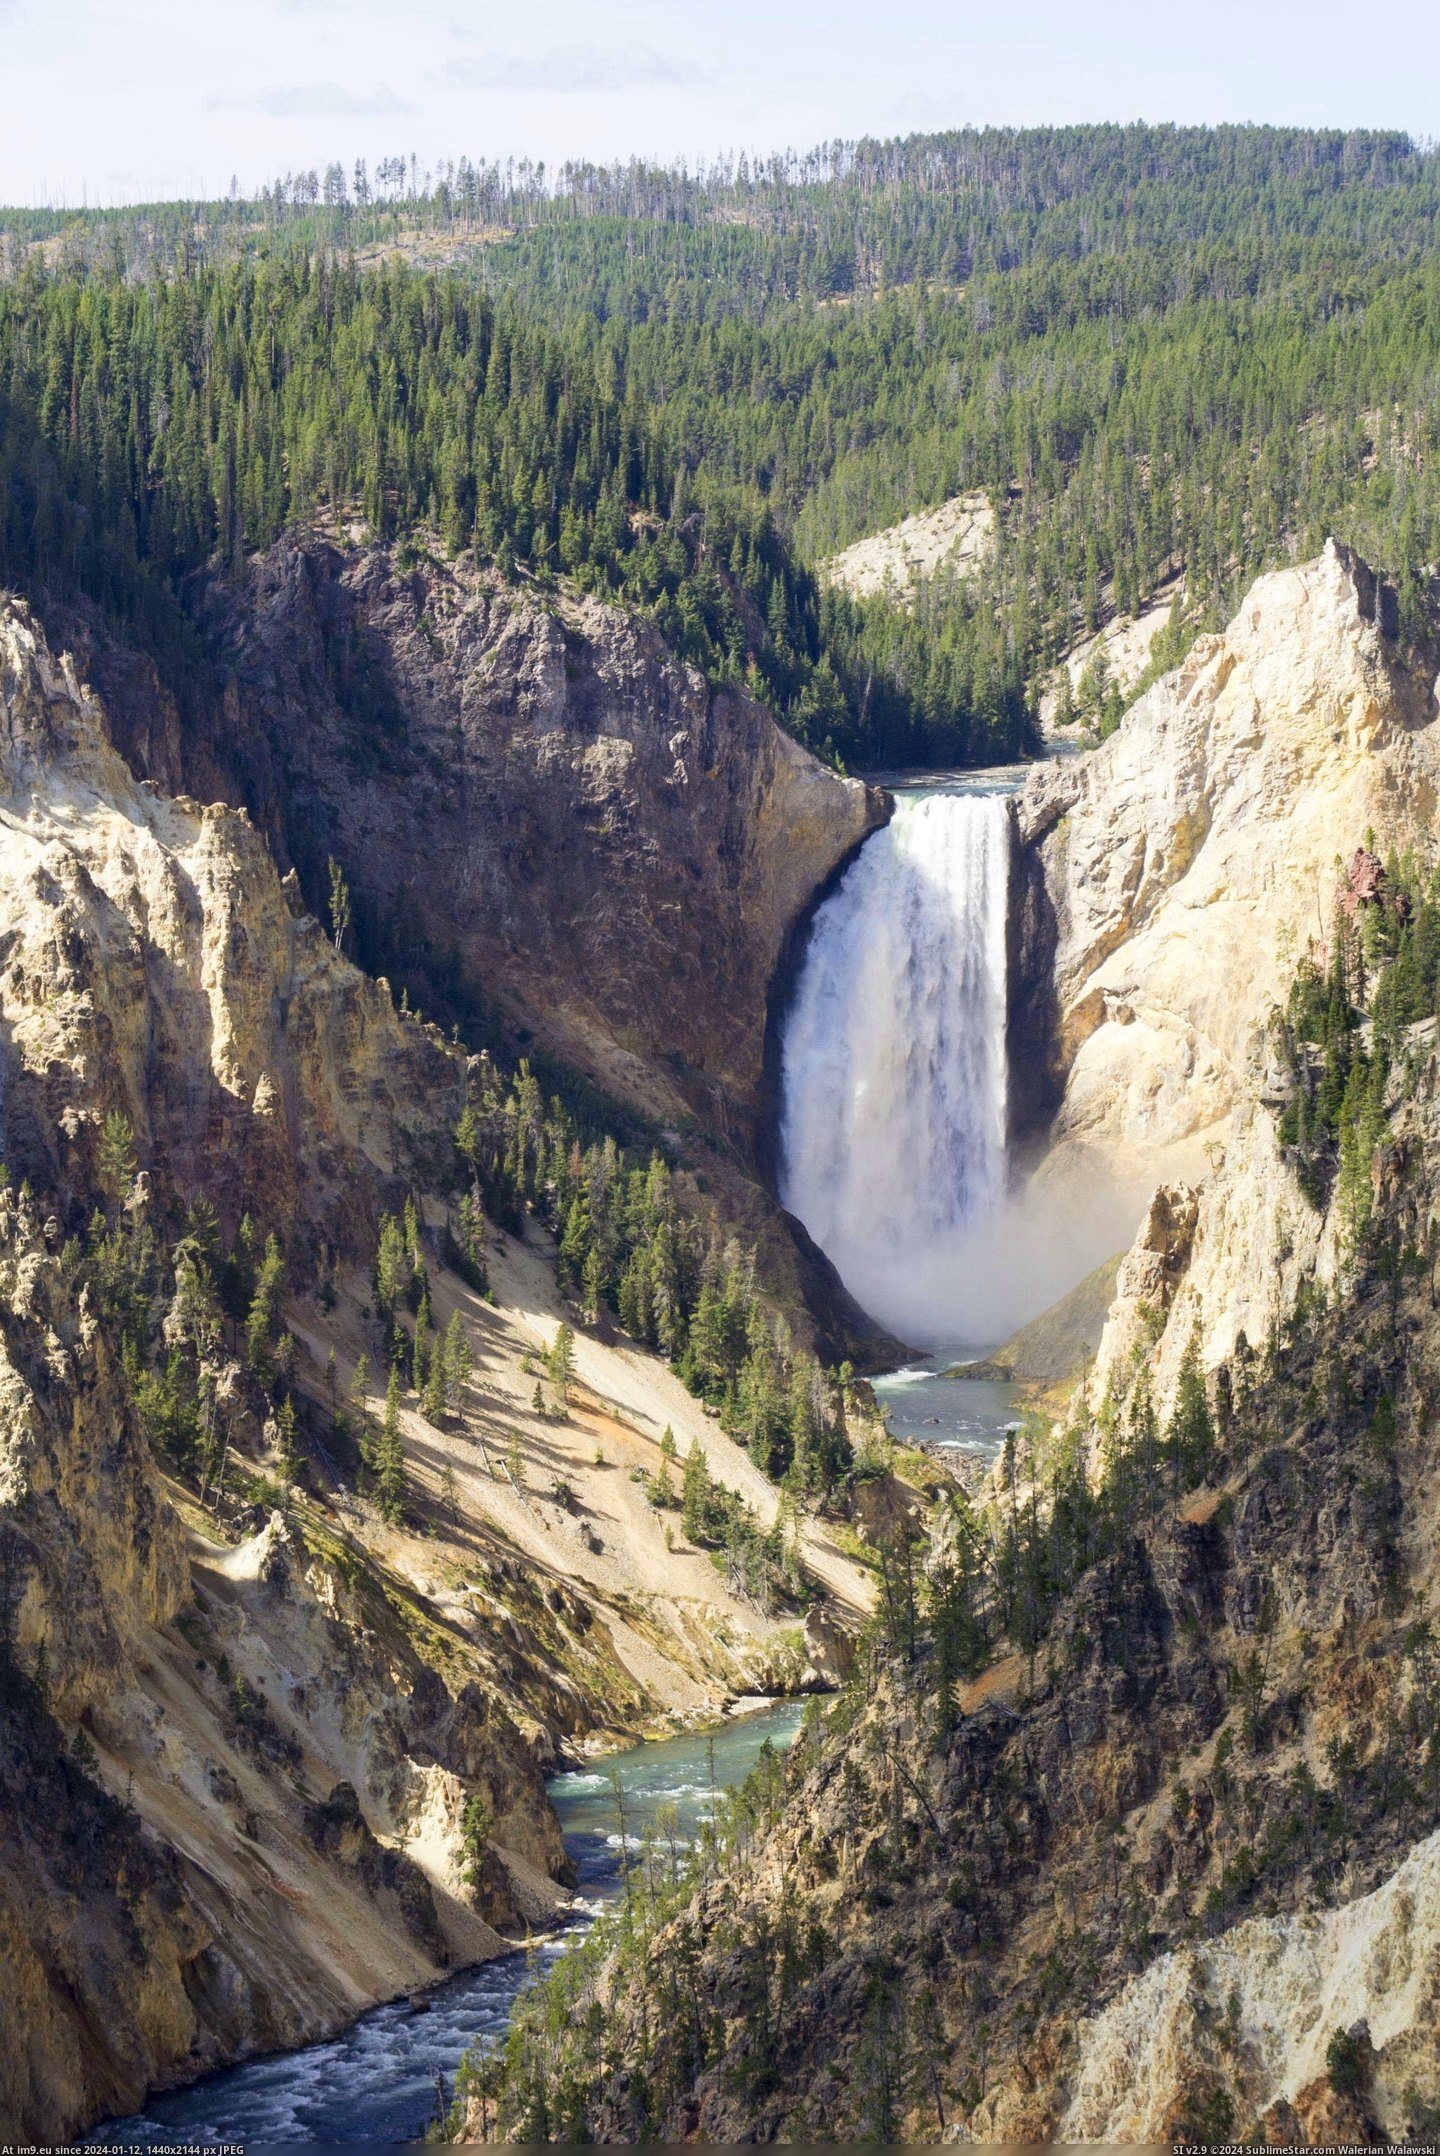 #Canyon #Usa #Grand #Waterfalls #Cloudy #Chance #Yellowstone #Wyoming [Earthporn] Partly cloudy with a chance of waterfalls: Grand Canyon of the Yellowstone, Wyoming, USA  [2332x3484] Pic. (Bild von album My r/EARTHPORN favs))